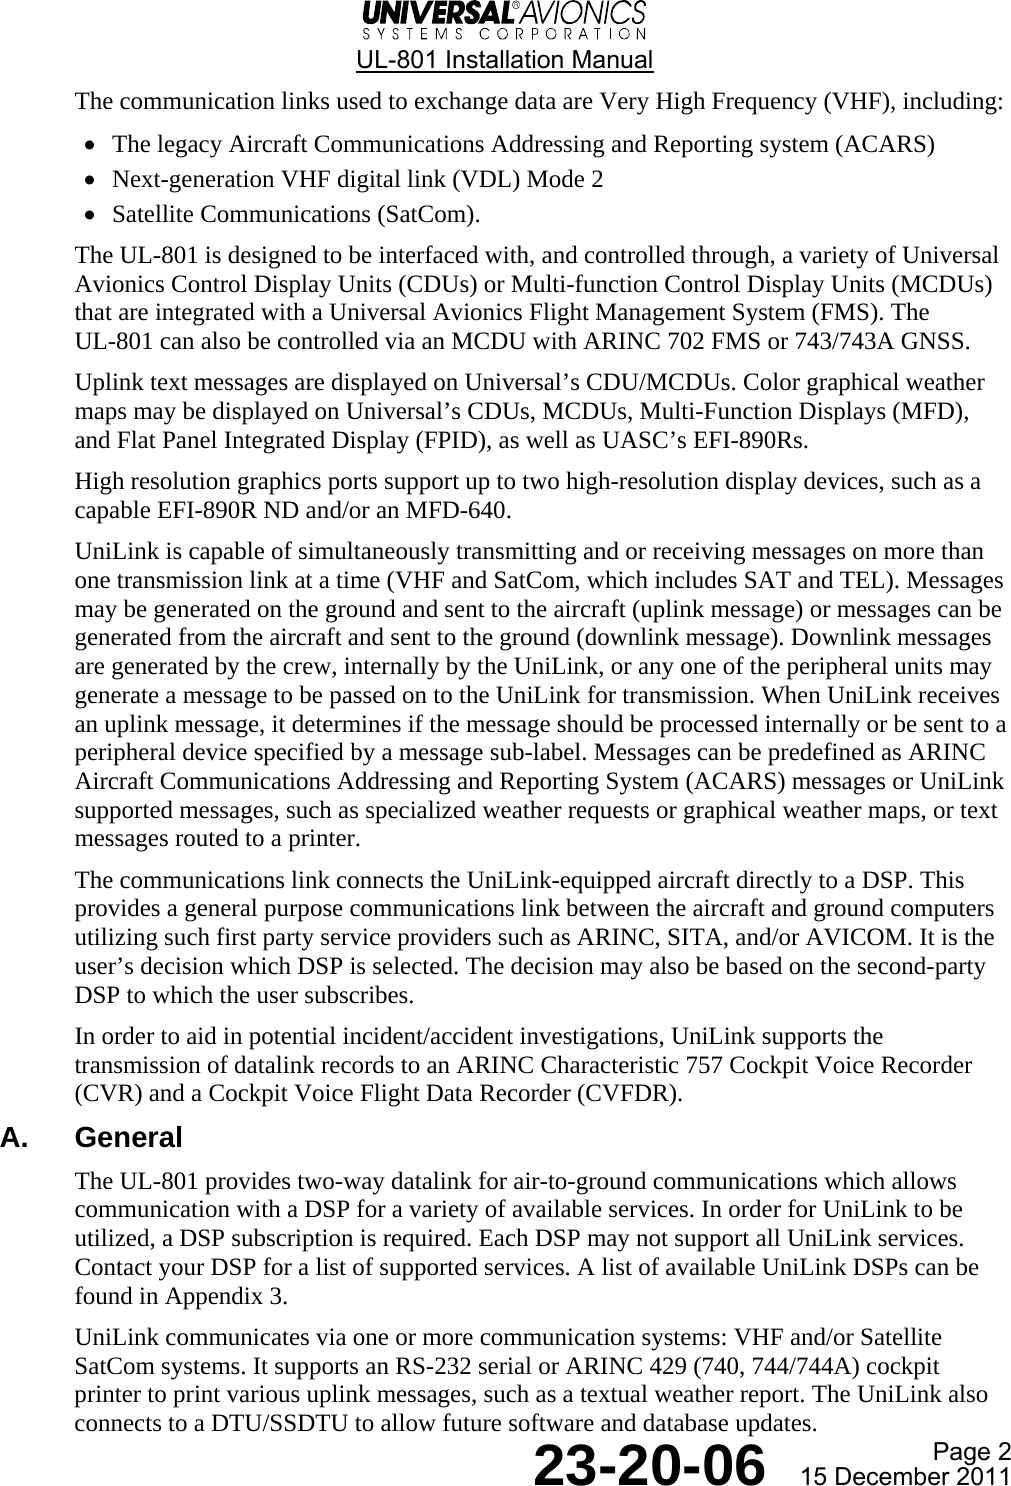  UL-801 Installation Manual  Page 2  23-20-06  15 December 2011 The communication links used to exchange data are Very High Frequency (VHF), including: • The legacy Aircraft Communications Addressing and Reporting system (ACARS) • Next-generation VHF digital link (VDL) Mode 2 • Satellite Communications (SatCom). The UL-801 is designed to be interfaced with, and controlled through, a variety of Universal Avionics Control Display Units (CDUs) or Multi-function Control Display Units (MCDUs) that are integrated with a Universal Avionics Flight Management System (FMS). The  UL-801 can also be controlled via an MCDU with ARINC 702 FMS or 743/743A GNSS. Uplink text messages are displayed on Universal’s CDU/MCDUs. Color graphical weather maps may be displayed on Universal’s CDUs, MCDUs, Multi-Function Displays (MFD), and Flat Panel Integrated Display (FPID), as well as UASC’s EFI-890Rs. High resolution graphics ports support up to two high-resolution display devices, such as a capable EFI-890R ND and/or an MFD-640. UniLink is capable of simultaneously transmitting and or receiving messages on more than one transmission link at a time (VHF and SatCom, which includes SAT and TEL). Messages may be generated on the ground and sent to the aircraft (uplink message) or messages can be generated from the aircraft and sent to the ground (downlink message). Downlink messages are generated by the crew, internally by the UniLink, or any one of the peripheral units may generate a message to be passed on to the UniLink for transmission. When UniLink receives an uplink message, it determines if the message should be processed internally or be sent to a peripheral device specified by a message sub-label. Messages can be predefined as ARINC Aircraft Communications Addressing and Reporting System (ACARS) messages or UniLink supported messages, such as specialized weather requests or graphical weather maps, or text messages routed to a printer. The communications link connects the UniLink-equipped aircraft directly to a DSP. This provides a general purpose communications link between the aircraft and ground computers utilizing such first party service providers such as ARINC, SITA, and/or AVICOM. It is the user’s decision which DSP is selected. The decision may also be based on the second-party DSP to which the user subscribes. In order to aid in potential incident/accident investigations, UniLink supports the transmission of datalink records to an ARINC Characteristic 757 Cockpit Voice Recorder (CVR) and a Cockpit Voice Flight Data Recorder (CVFDR). A. General The UL-801 provides two-way datalink for air-to-ground communications which allows communication with a DSP for a variety of available services. In order for UniLink to be utilized, a DSP subscription is required. Each DSP may not support all UniLink services. Contact your DSP for a list of supported services. A list of available UniLink DSPs can be found in Appendix 3. UniLink communicates via one or more communication systems: VHF and/or Satellite SatCom systems. It supports an RS-232 serial or ARINC 429 (740, 744/744A) cockpit printer to print various uplink messages, such as a textual weather report. The UniLink also connects to a DTU/SSDTU to allow future software and database updates. 